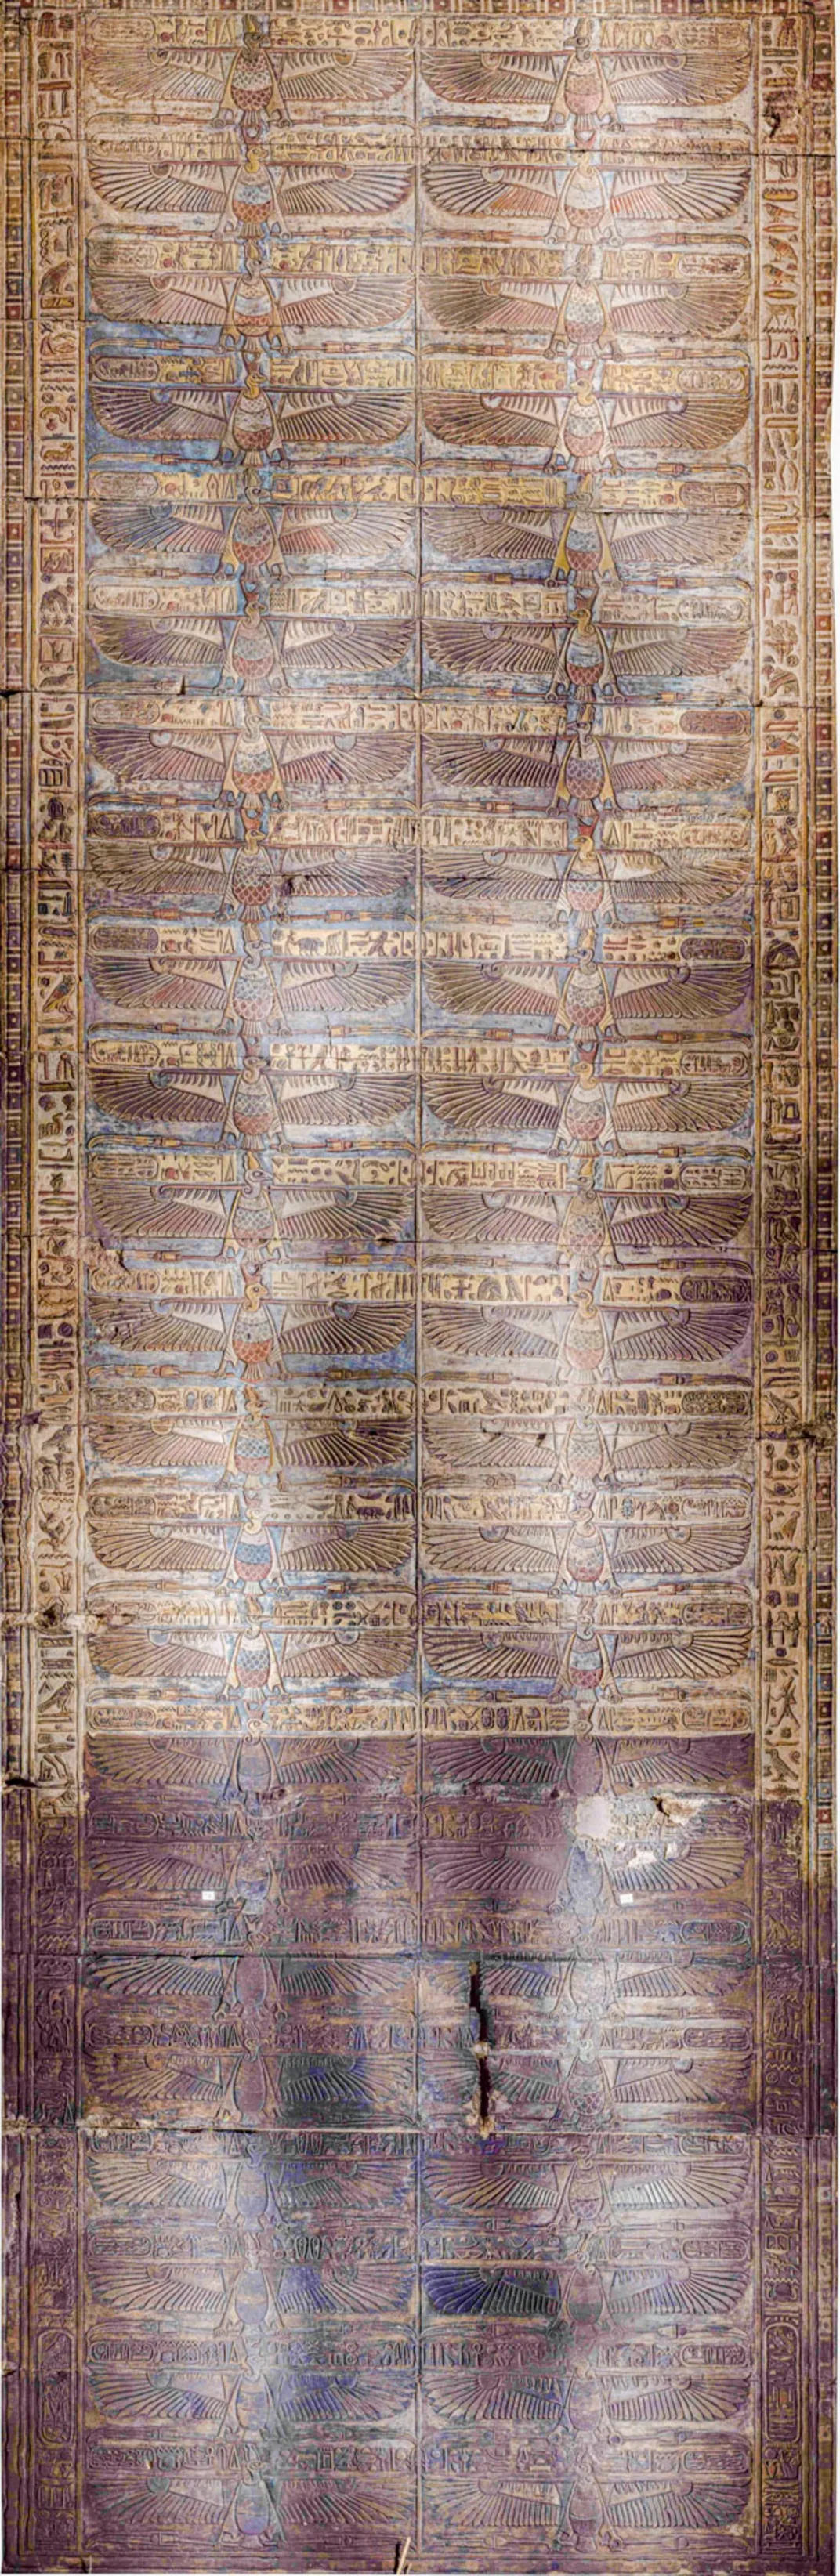 Ceiling of Egyptian temple